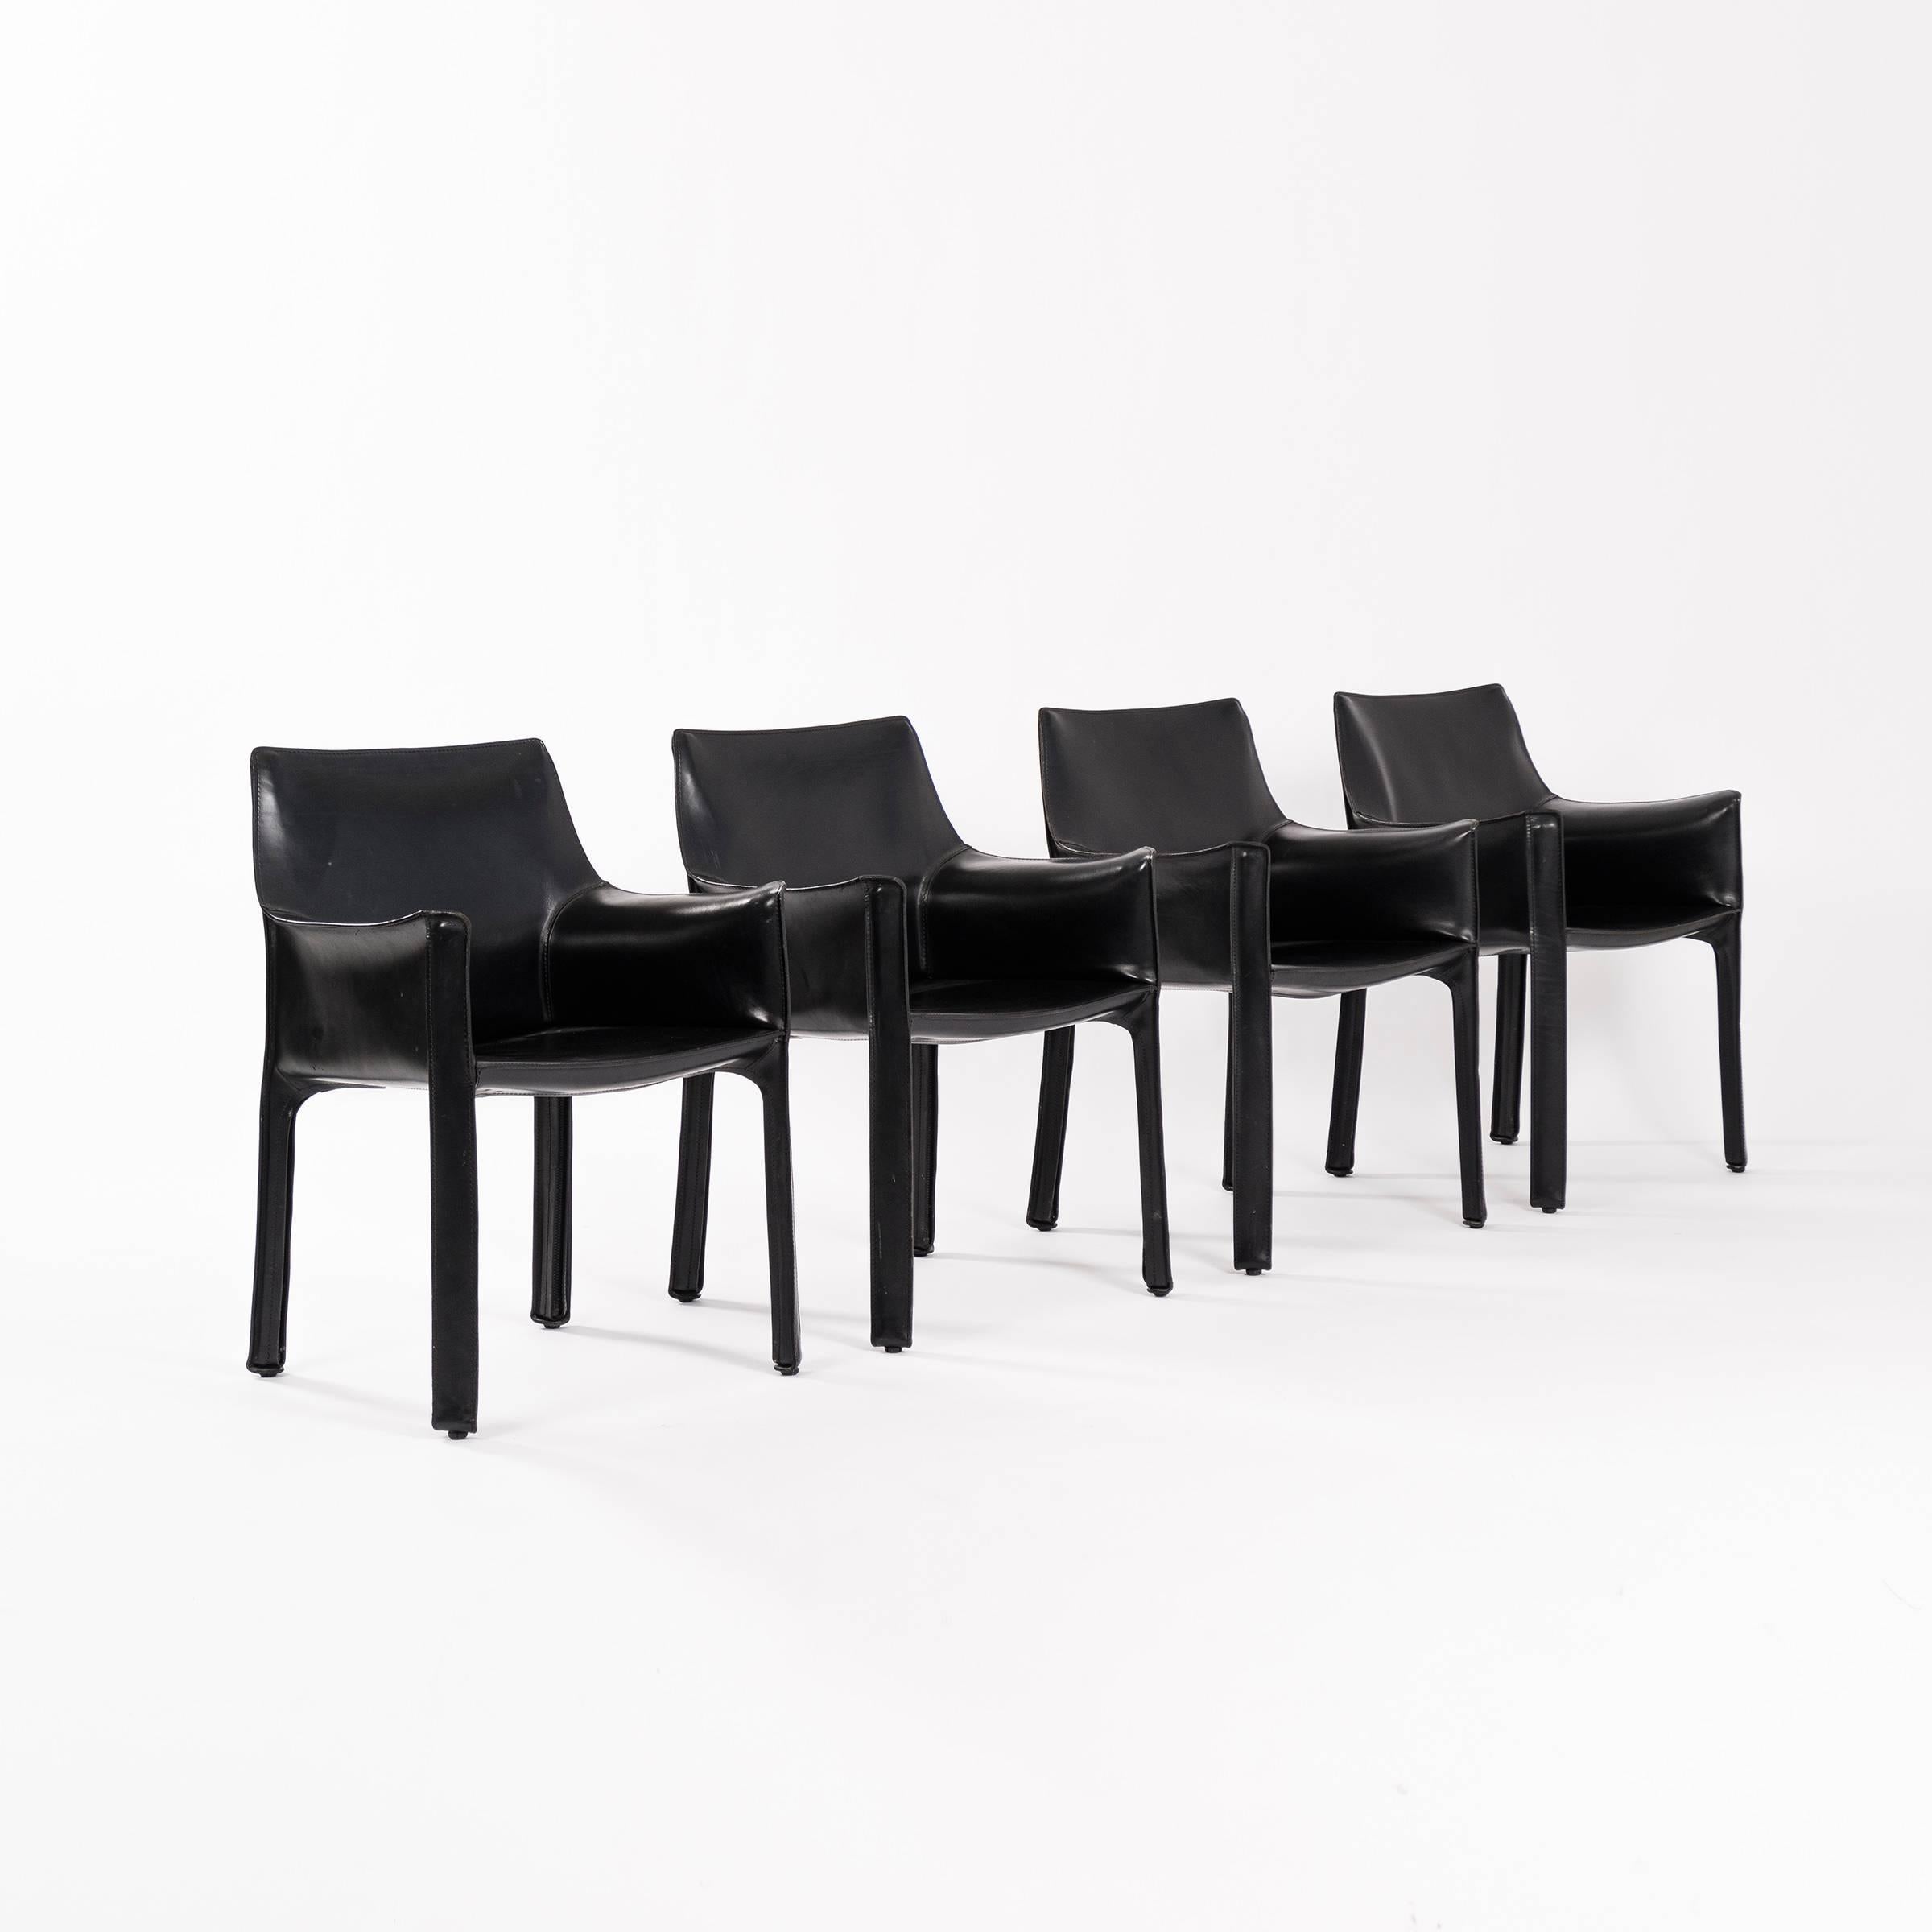 Set of four 413 CAB dining chairs in black saddle leather. Excellent vintage condition.